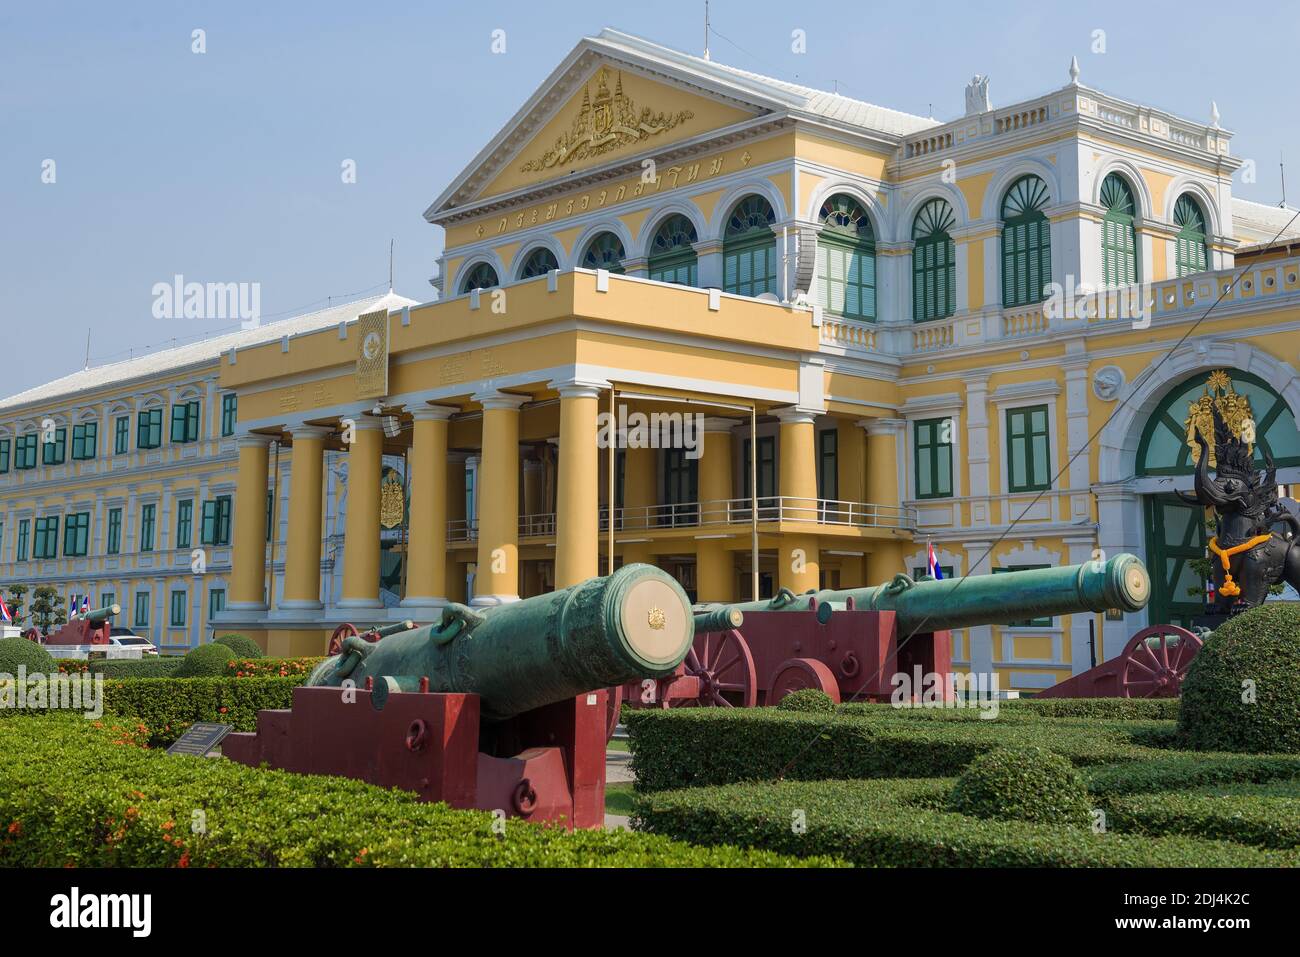 BANGKOK, THAILAND - DECEMBER 28, 2018: Antique cannons at the entrance to the main building of the Ministry of Defense Stock Photo